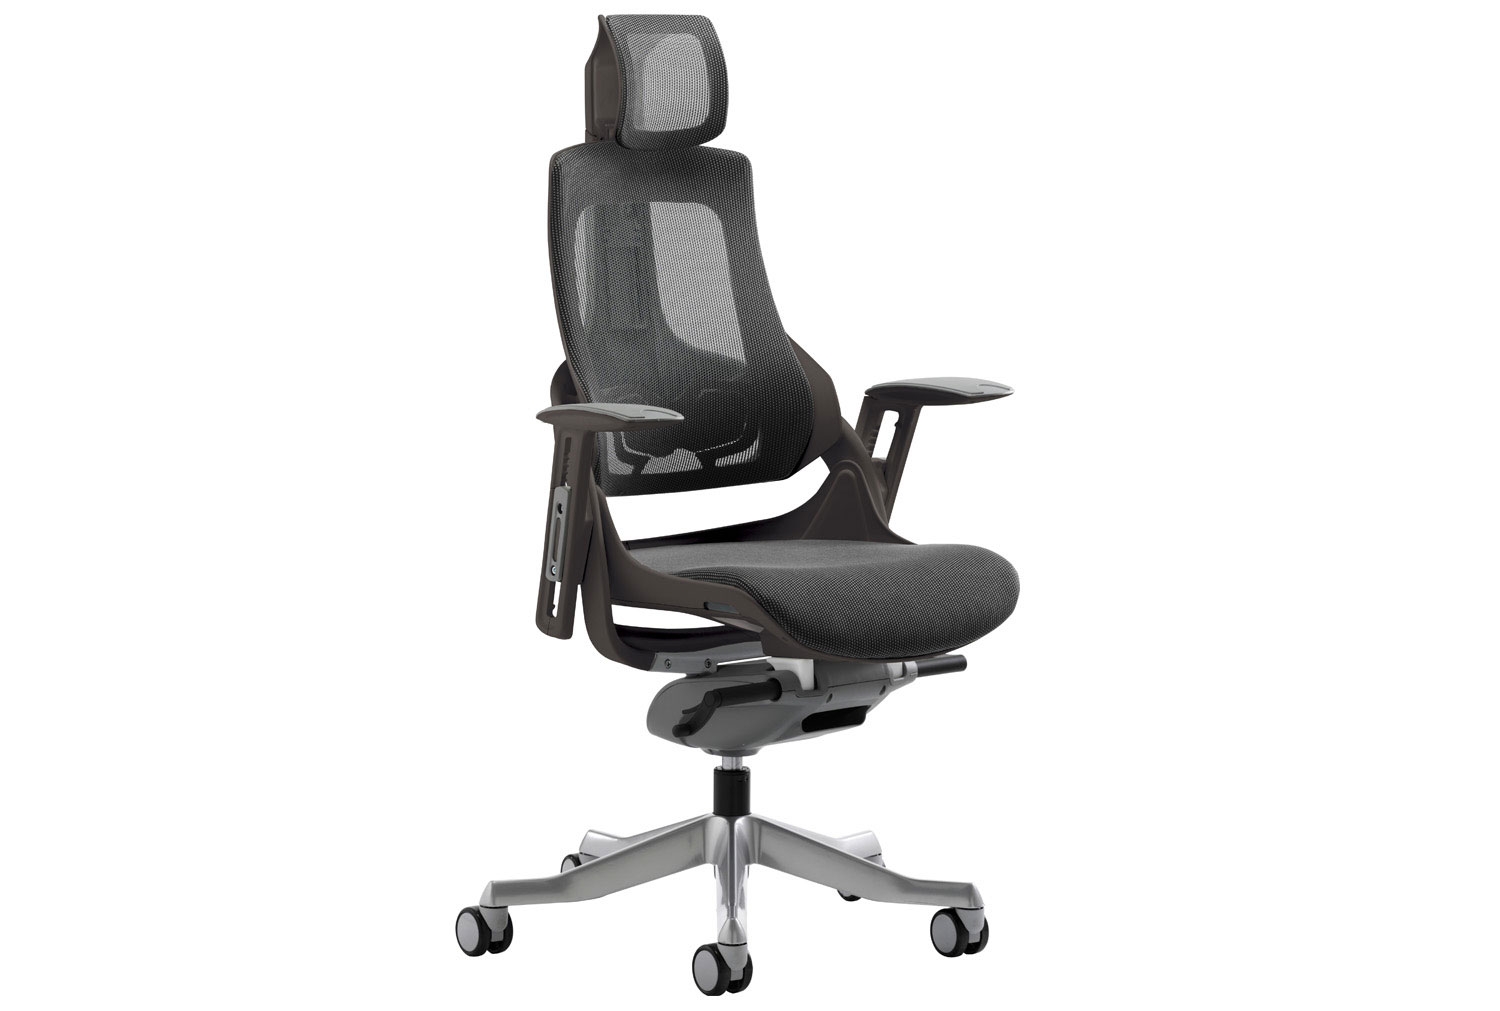 Zephyr High Mesh Back Operator Office Chair With Headrest (Black), Fully Installed